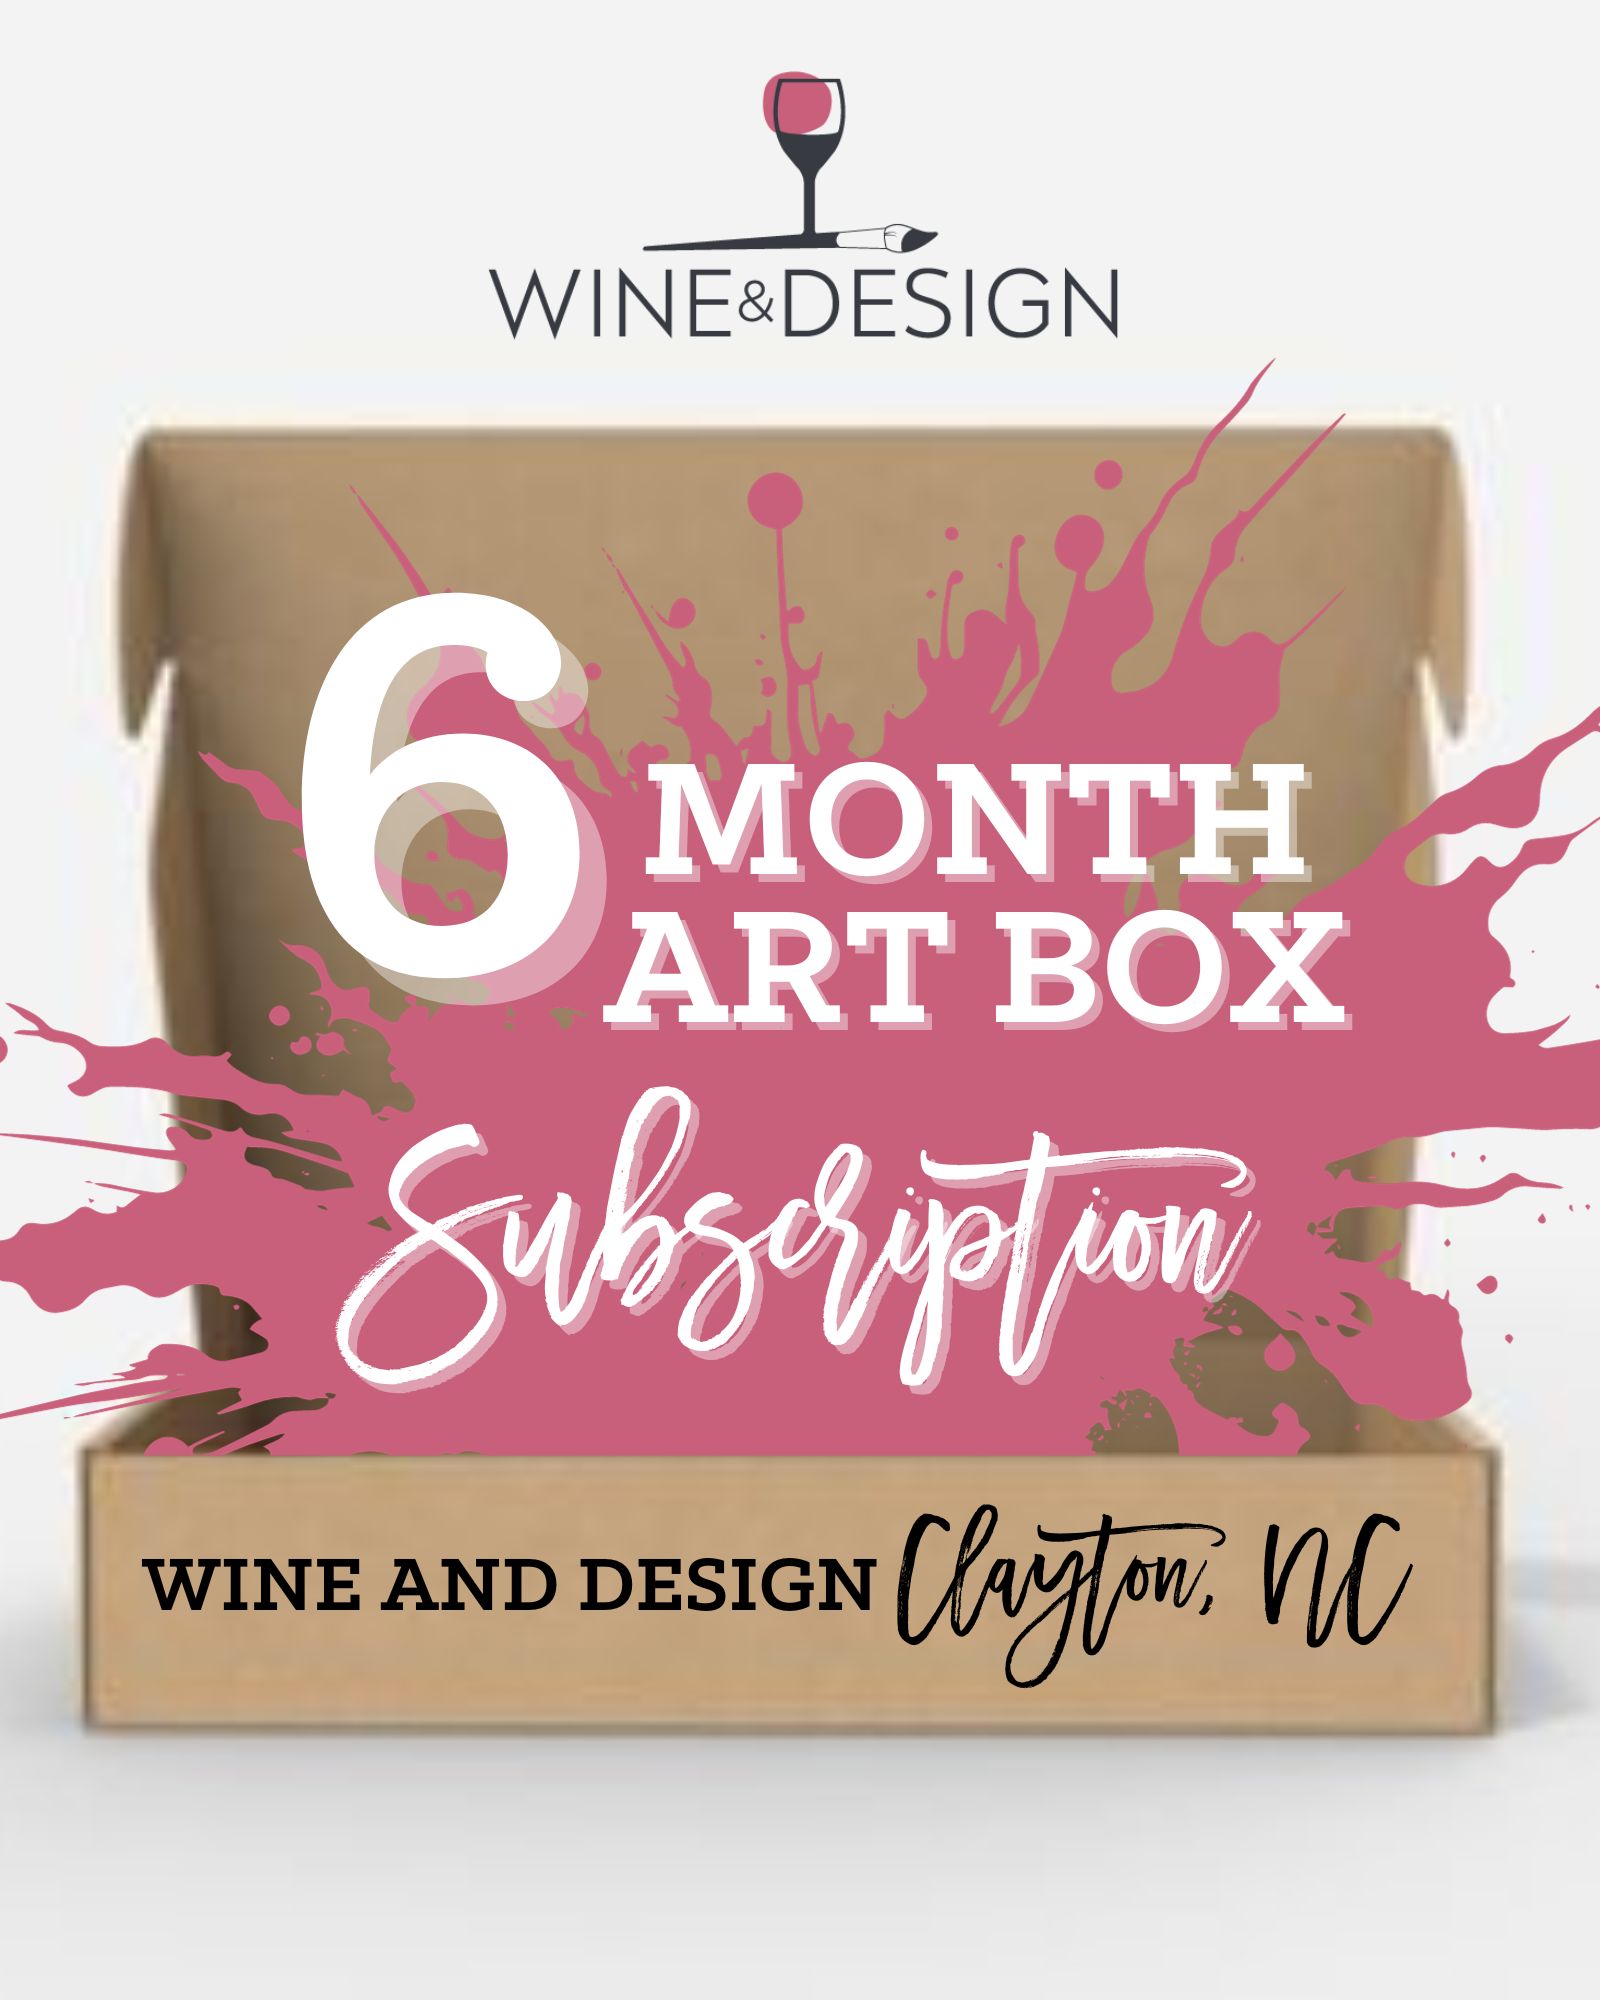 6 MONTH ARTBOX Subscrition